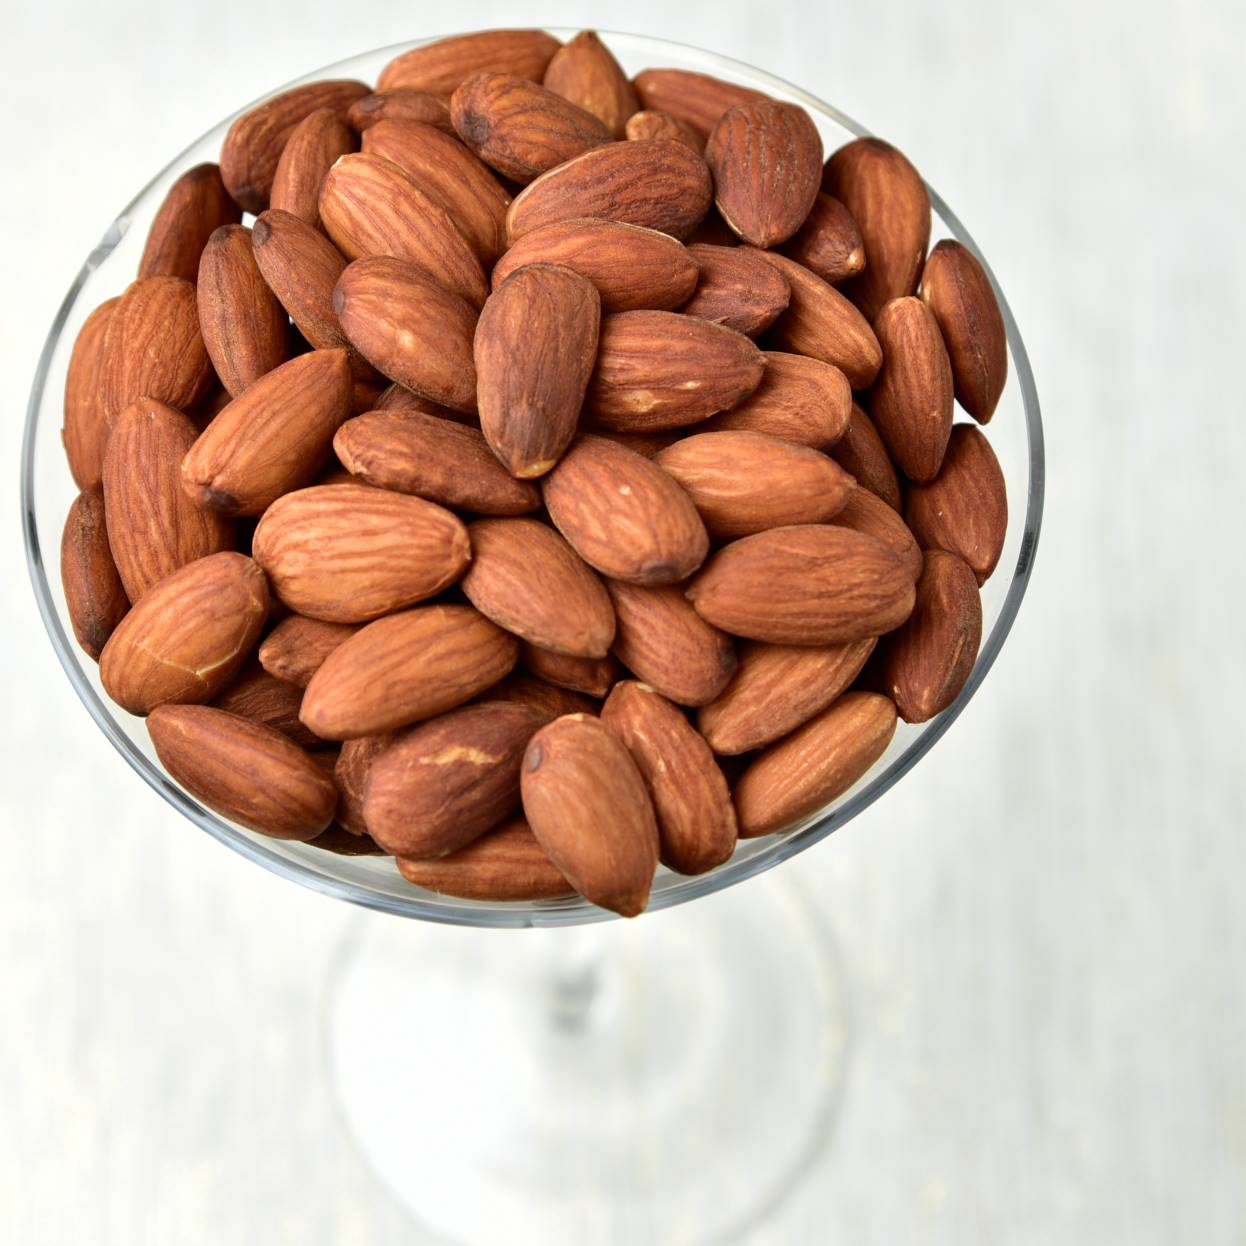 Buy Unsalted Almonds - Free Shipping - Sunnyland Farms